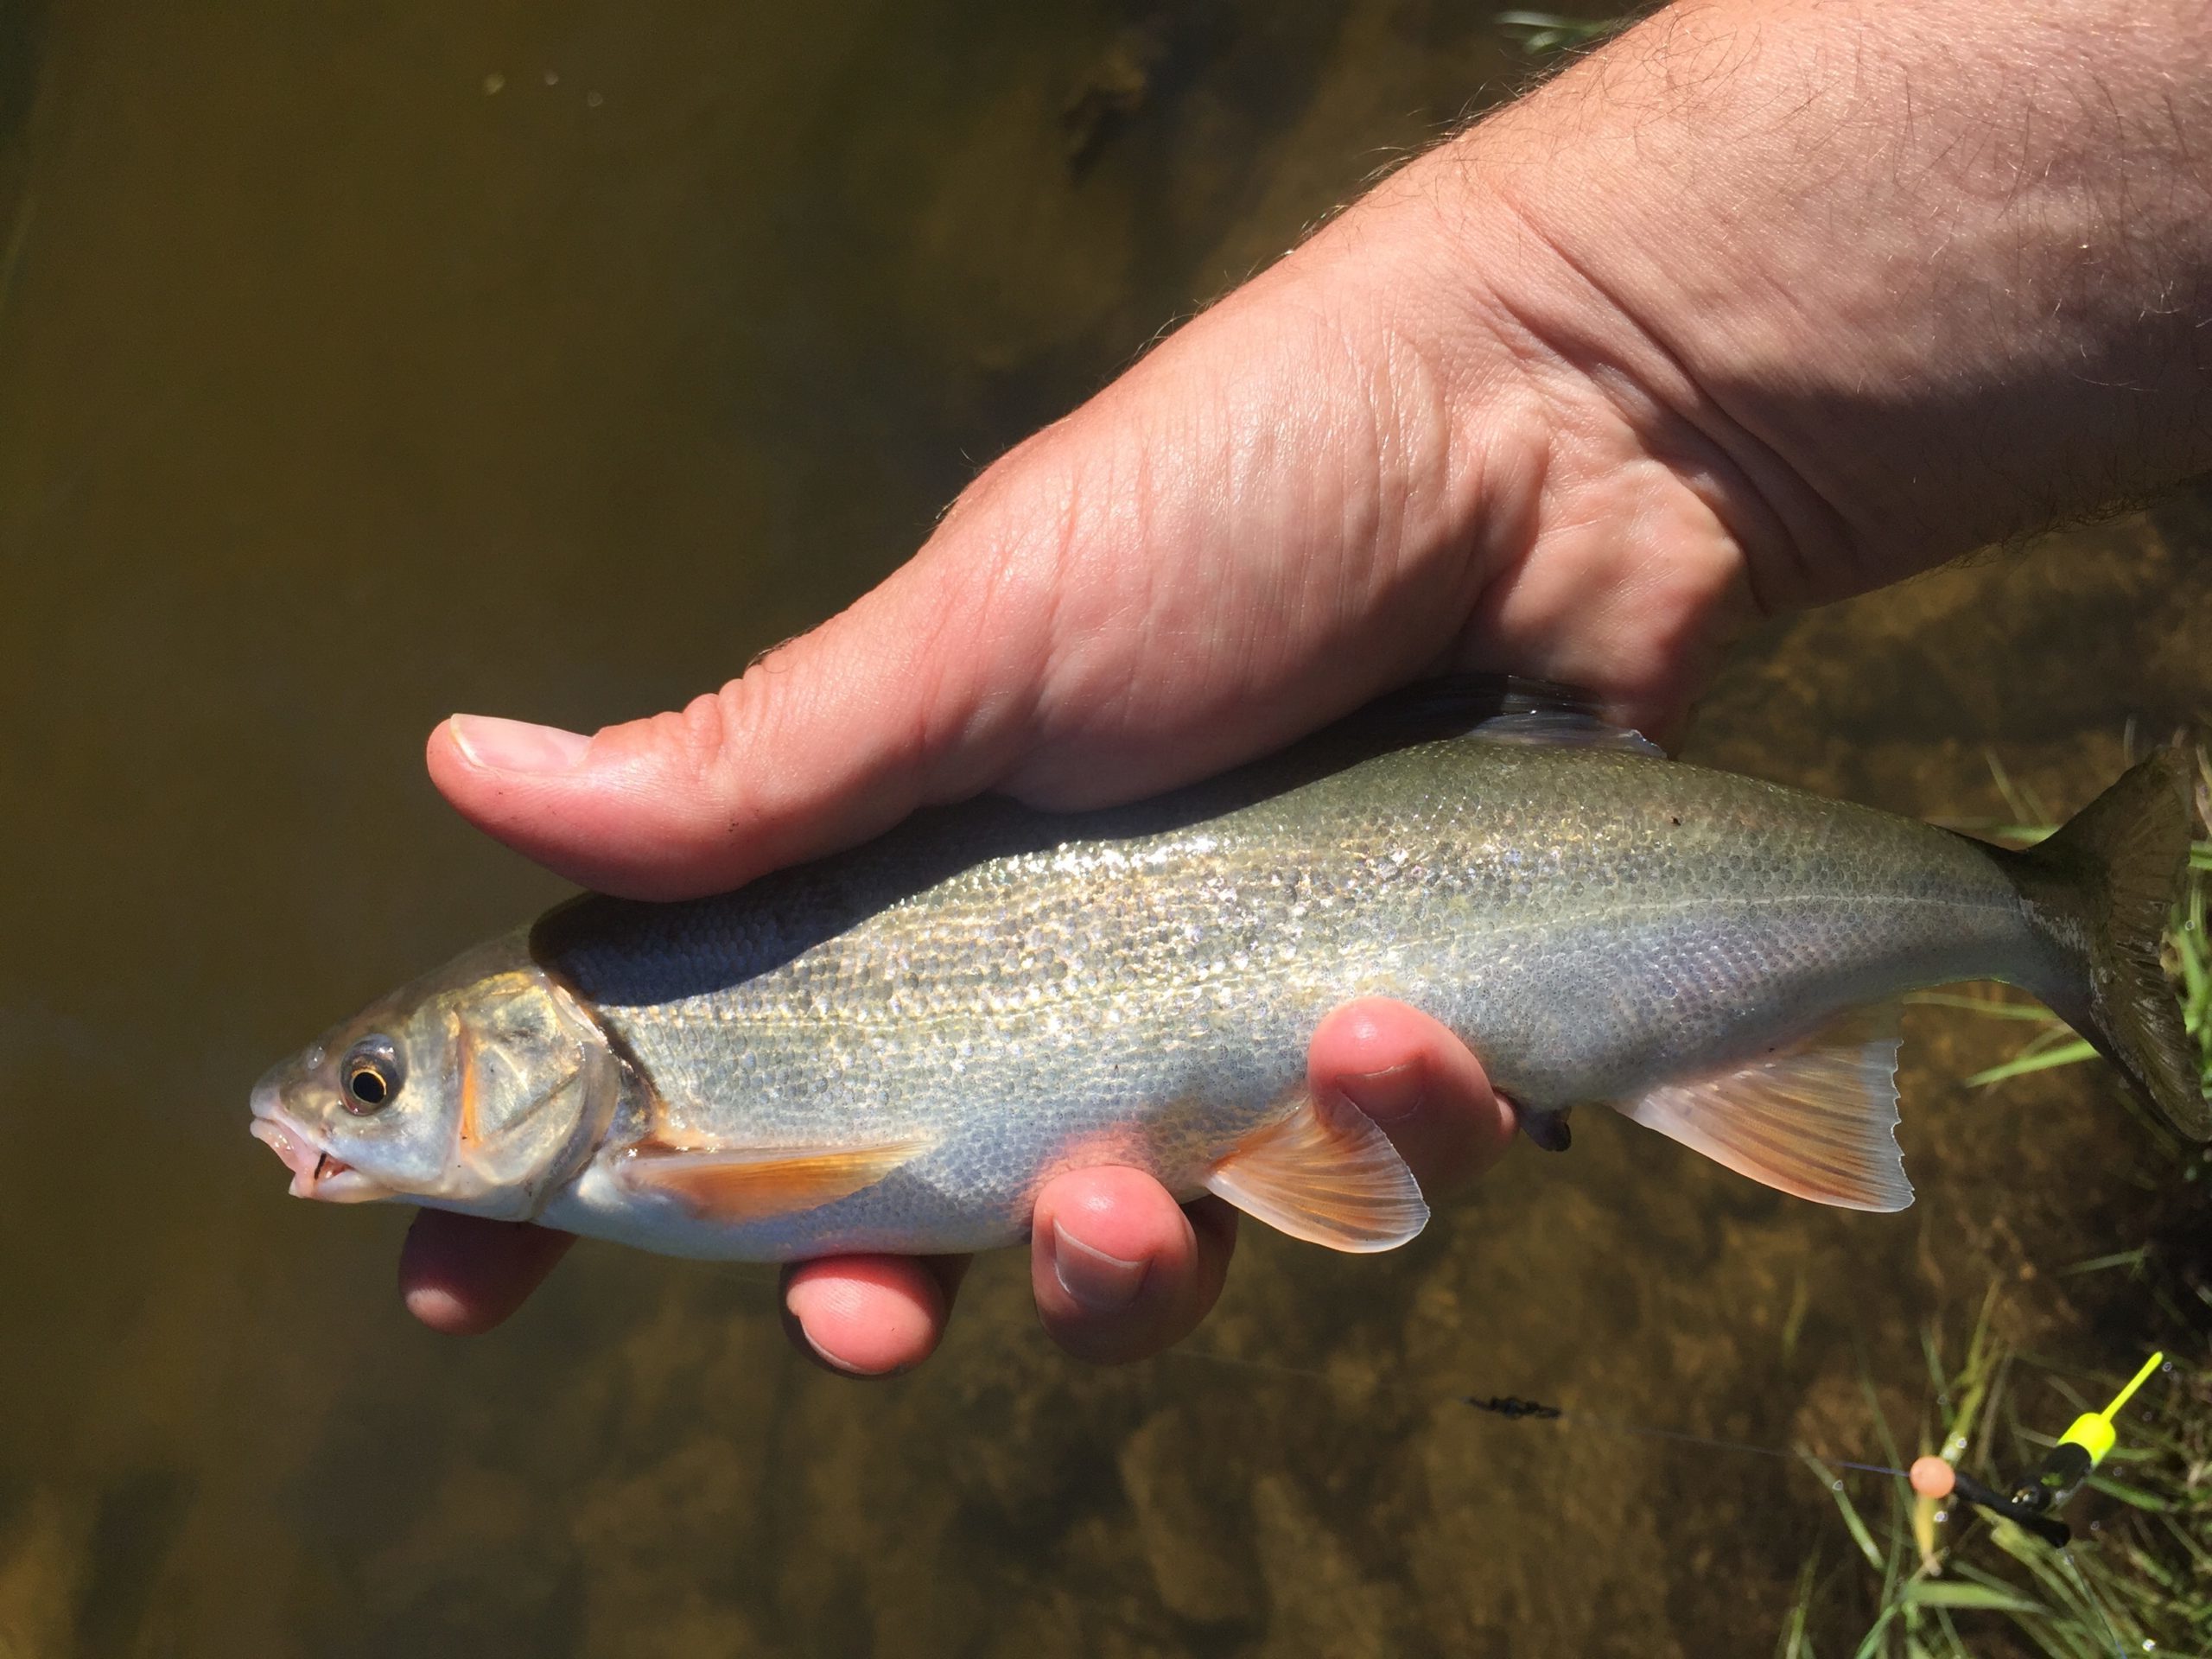 Get to know the freshwater fishing species and how to catch them